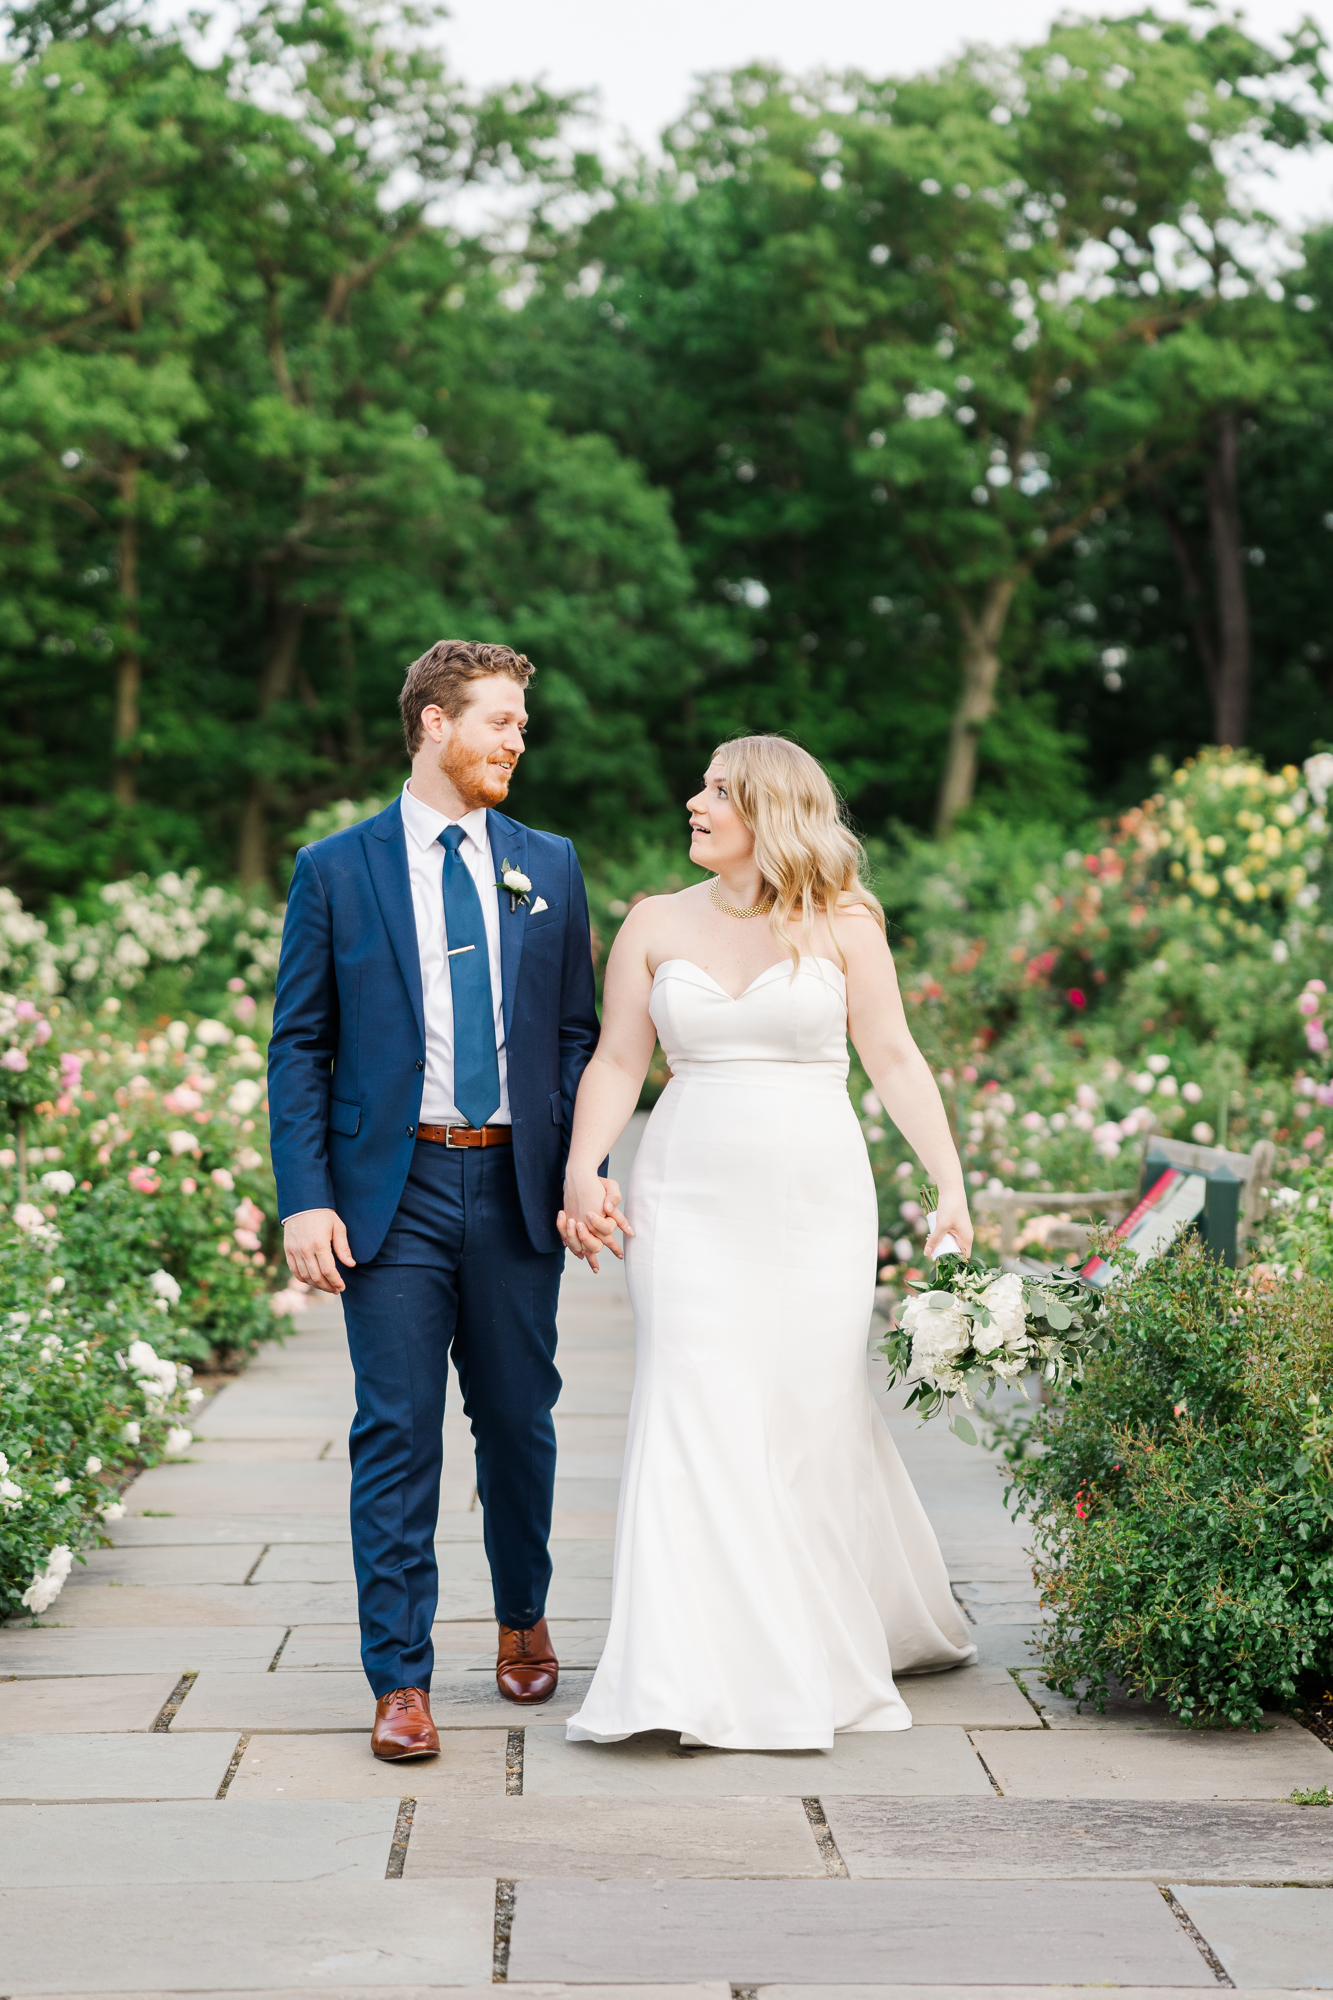 Lovely NYBG Summer Wedding at Stone Mill